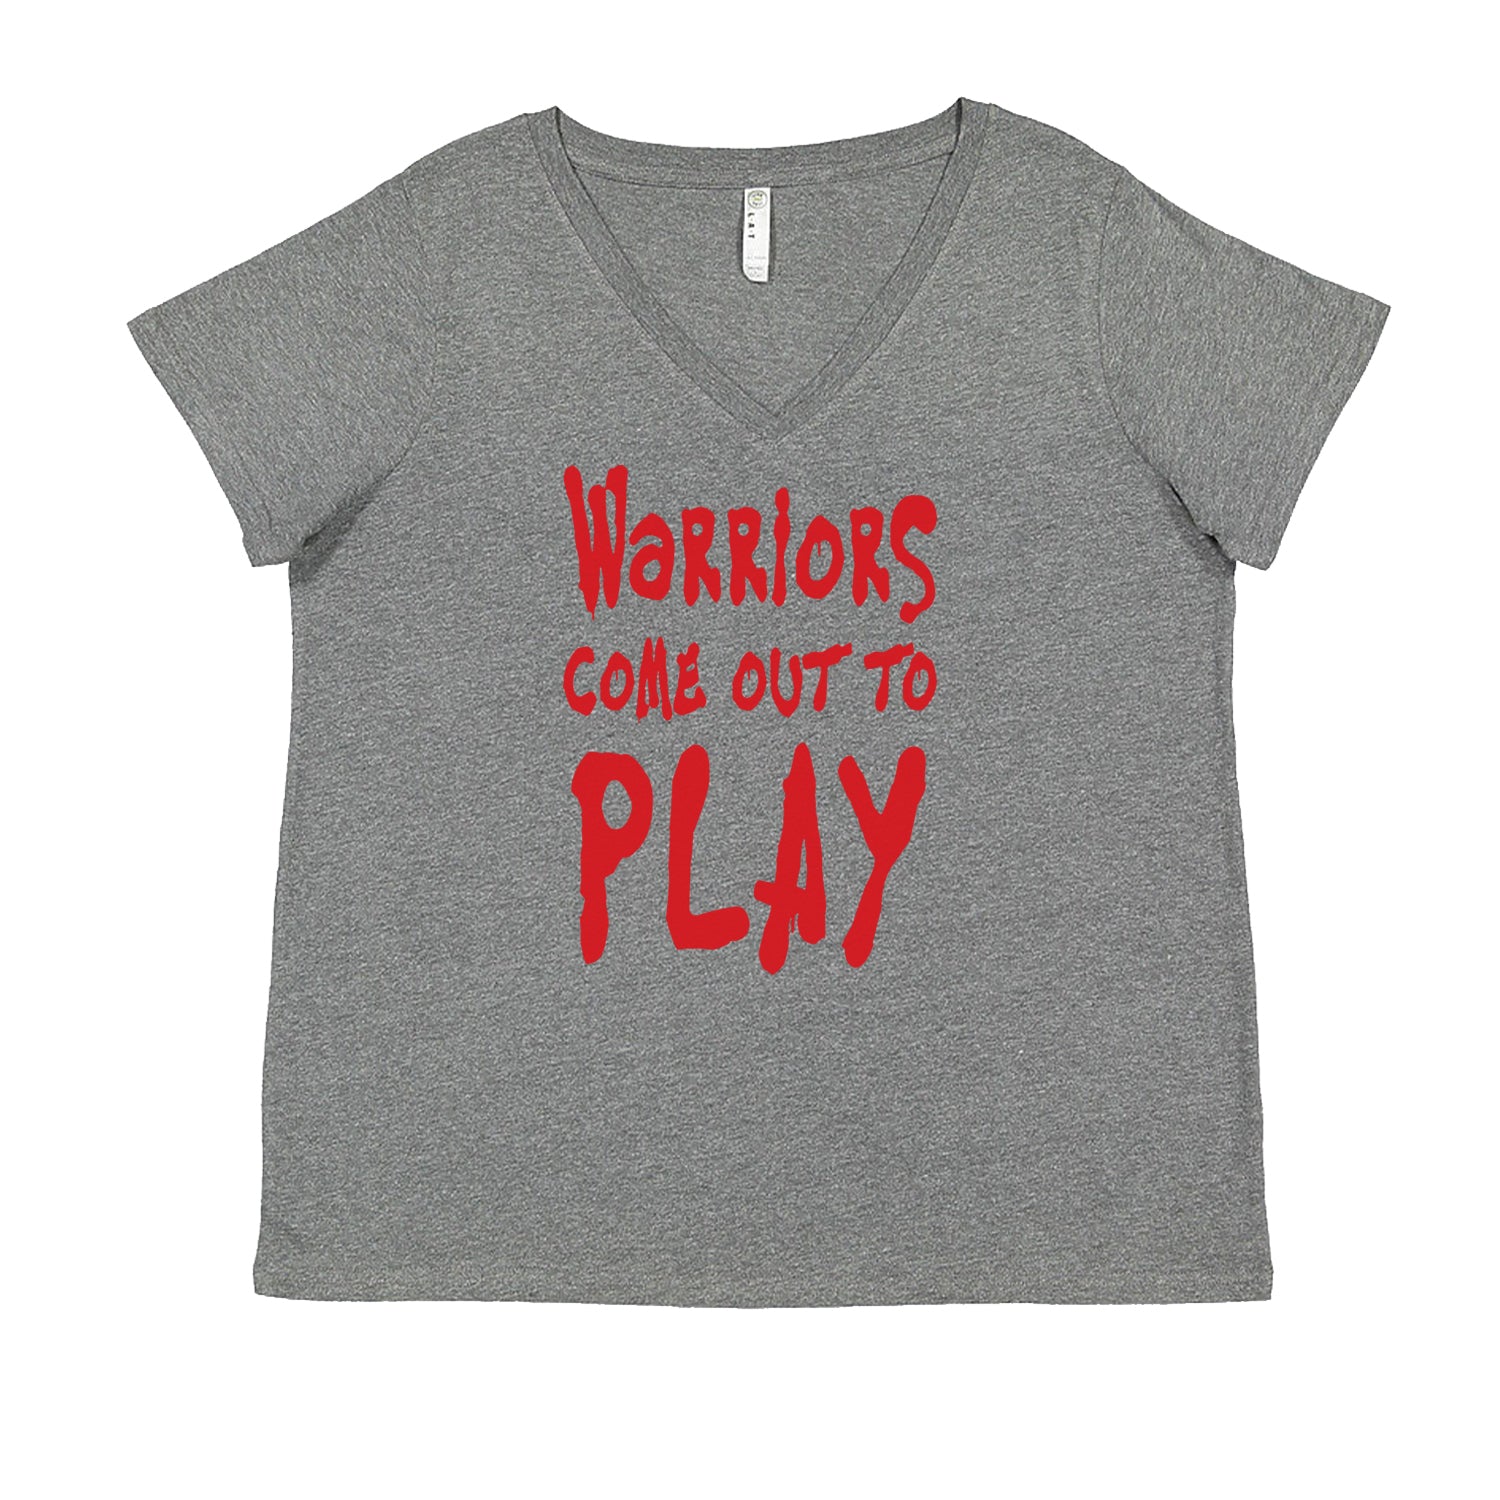 Warriors Come Out To Play  Ladies V-Neck T-shirt Heather Grey